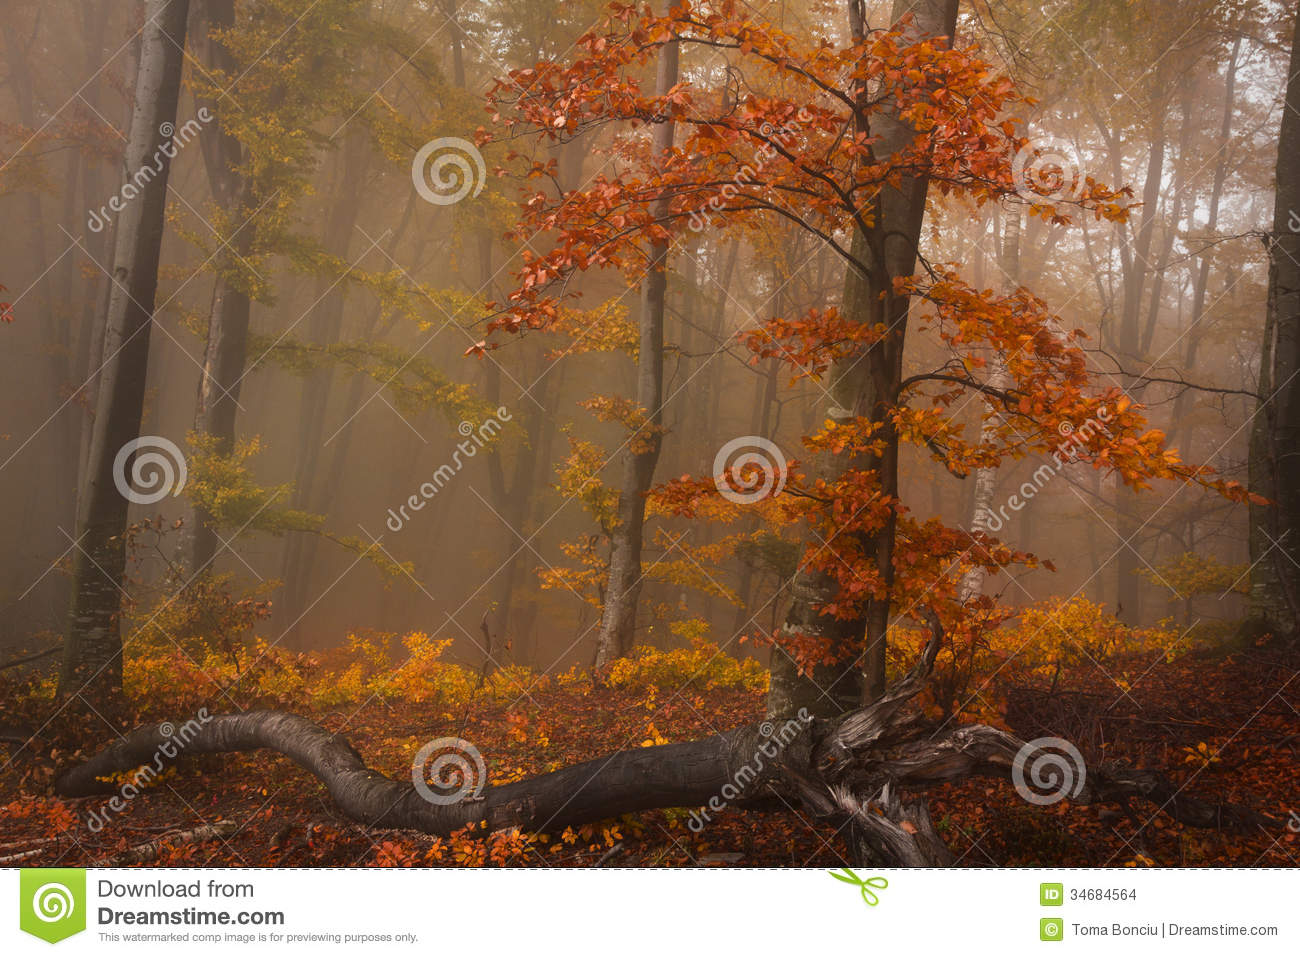 Foggy Forest During Fall And A Red Tree Stock Images   Image  34684564